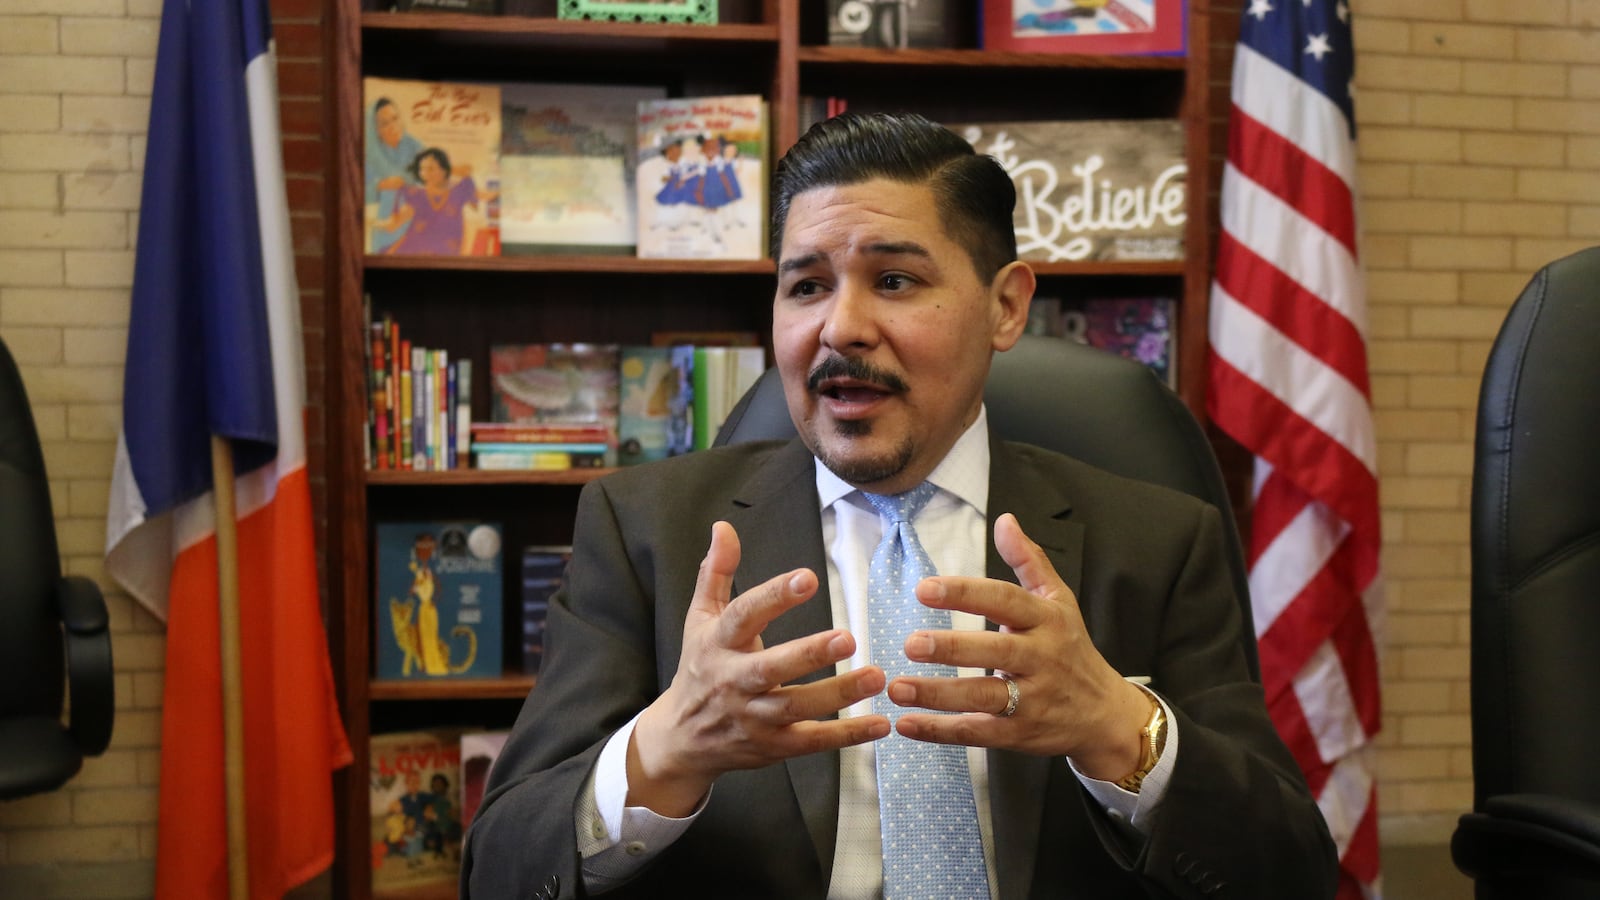 Schools Chancellor Richard Carranza at Tweed Courthouse, the education department's headquarters.